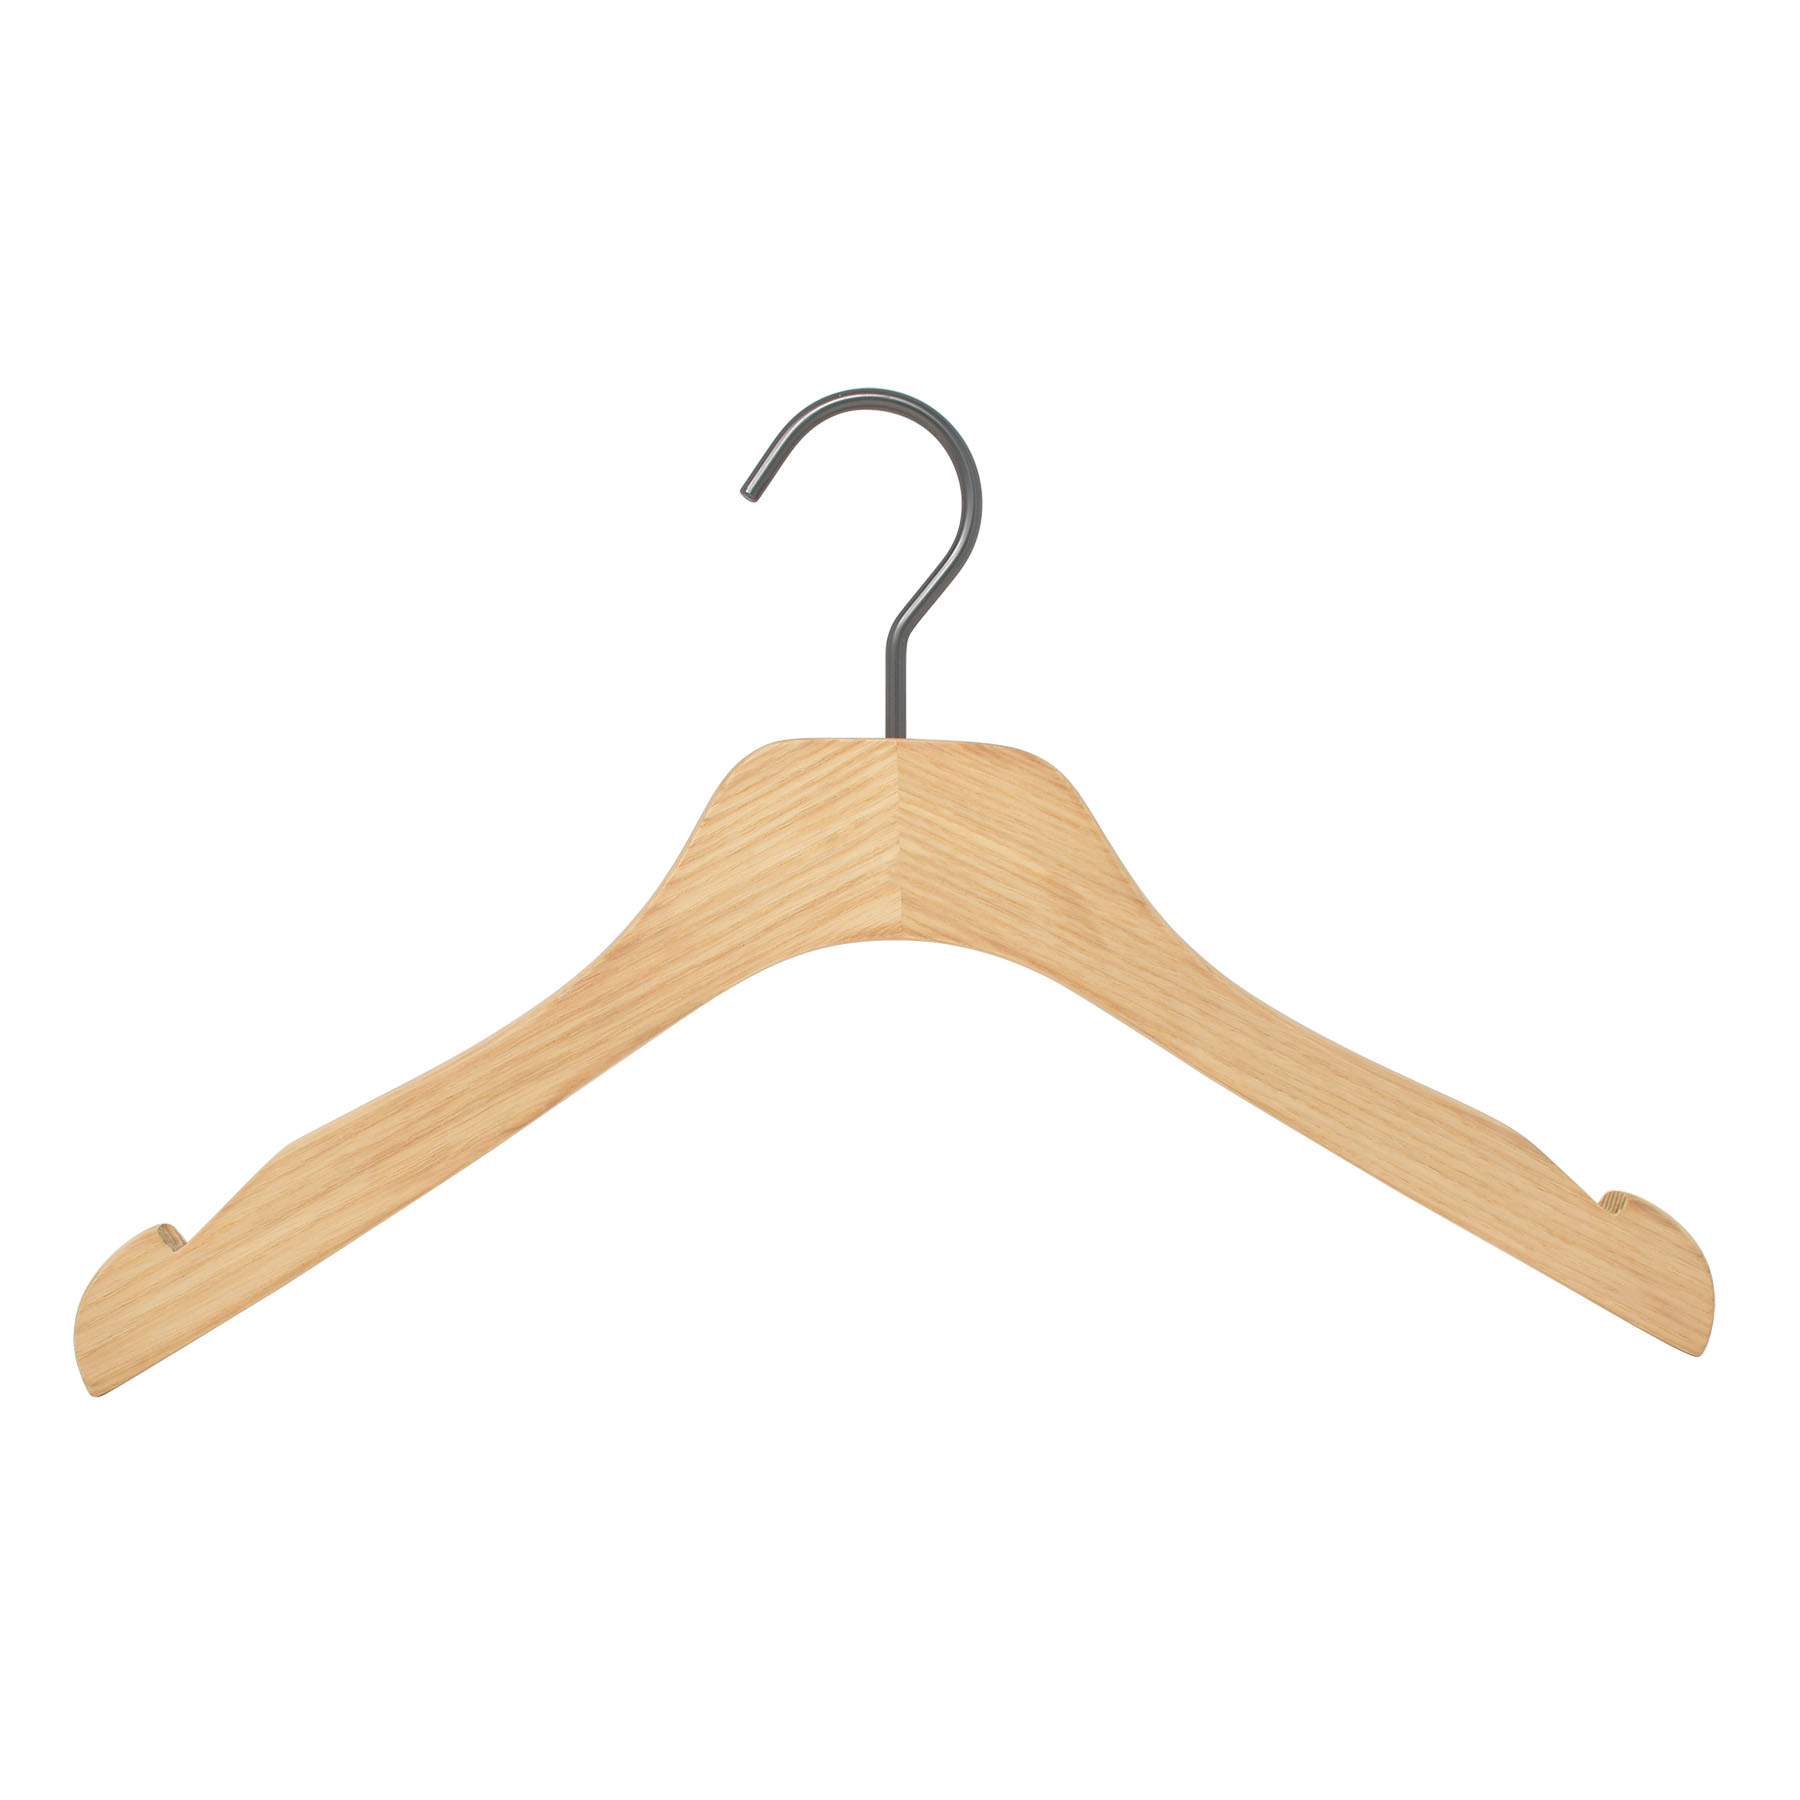 High quality hangers in natural varnish ash wood